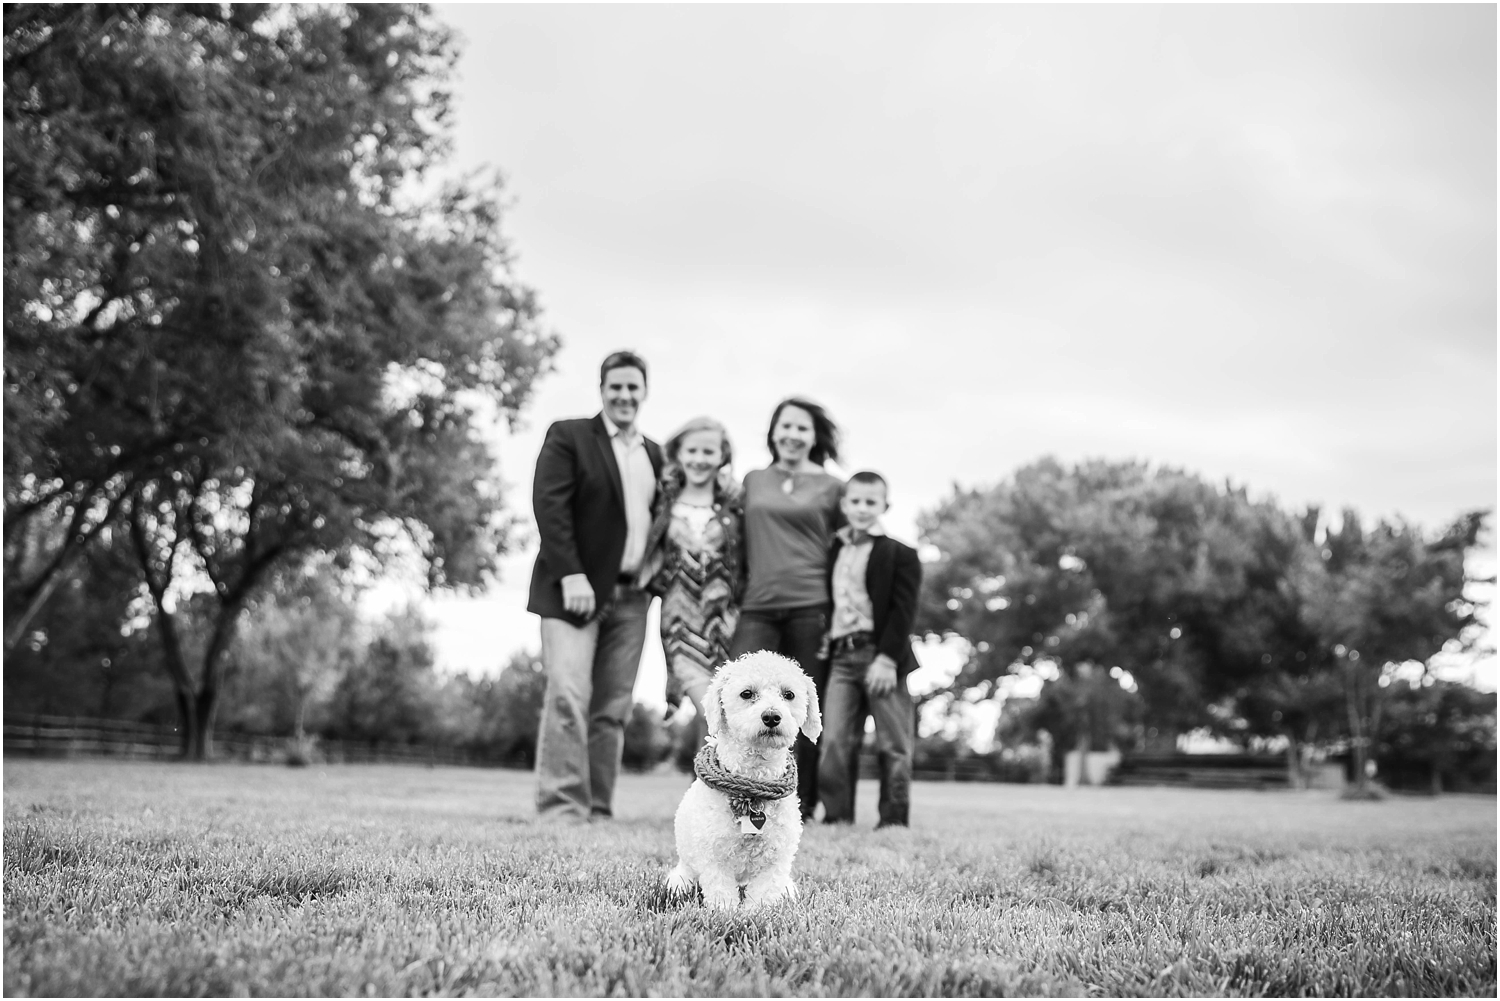 Family Photography in Albuquerque NM at Hartnett Park | Family of four with dog photo session